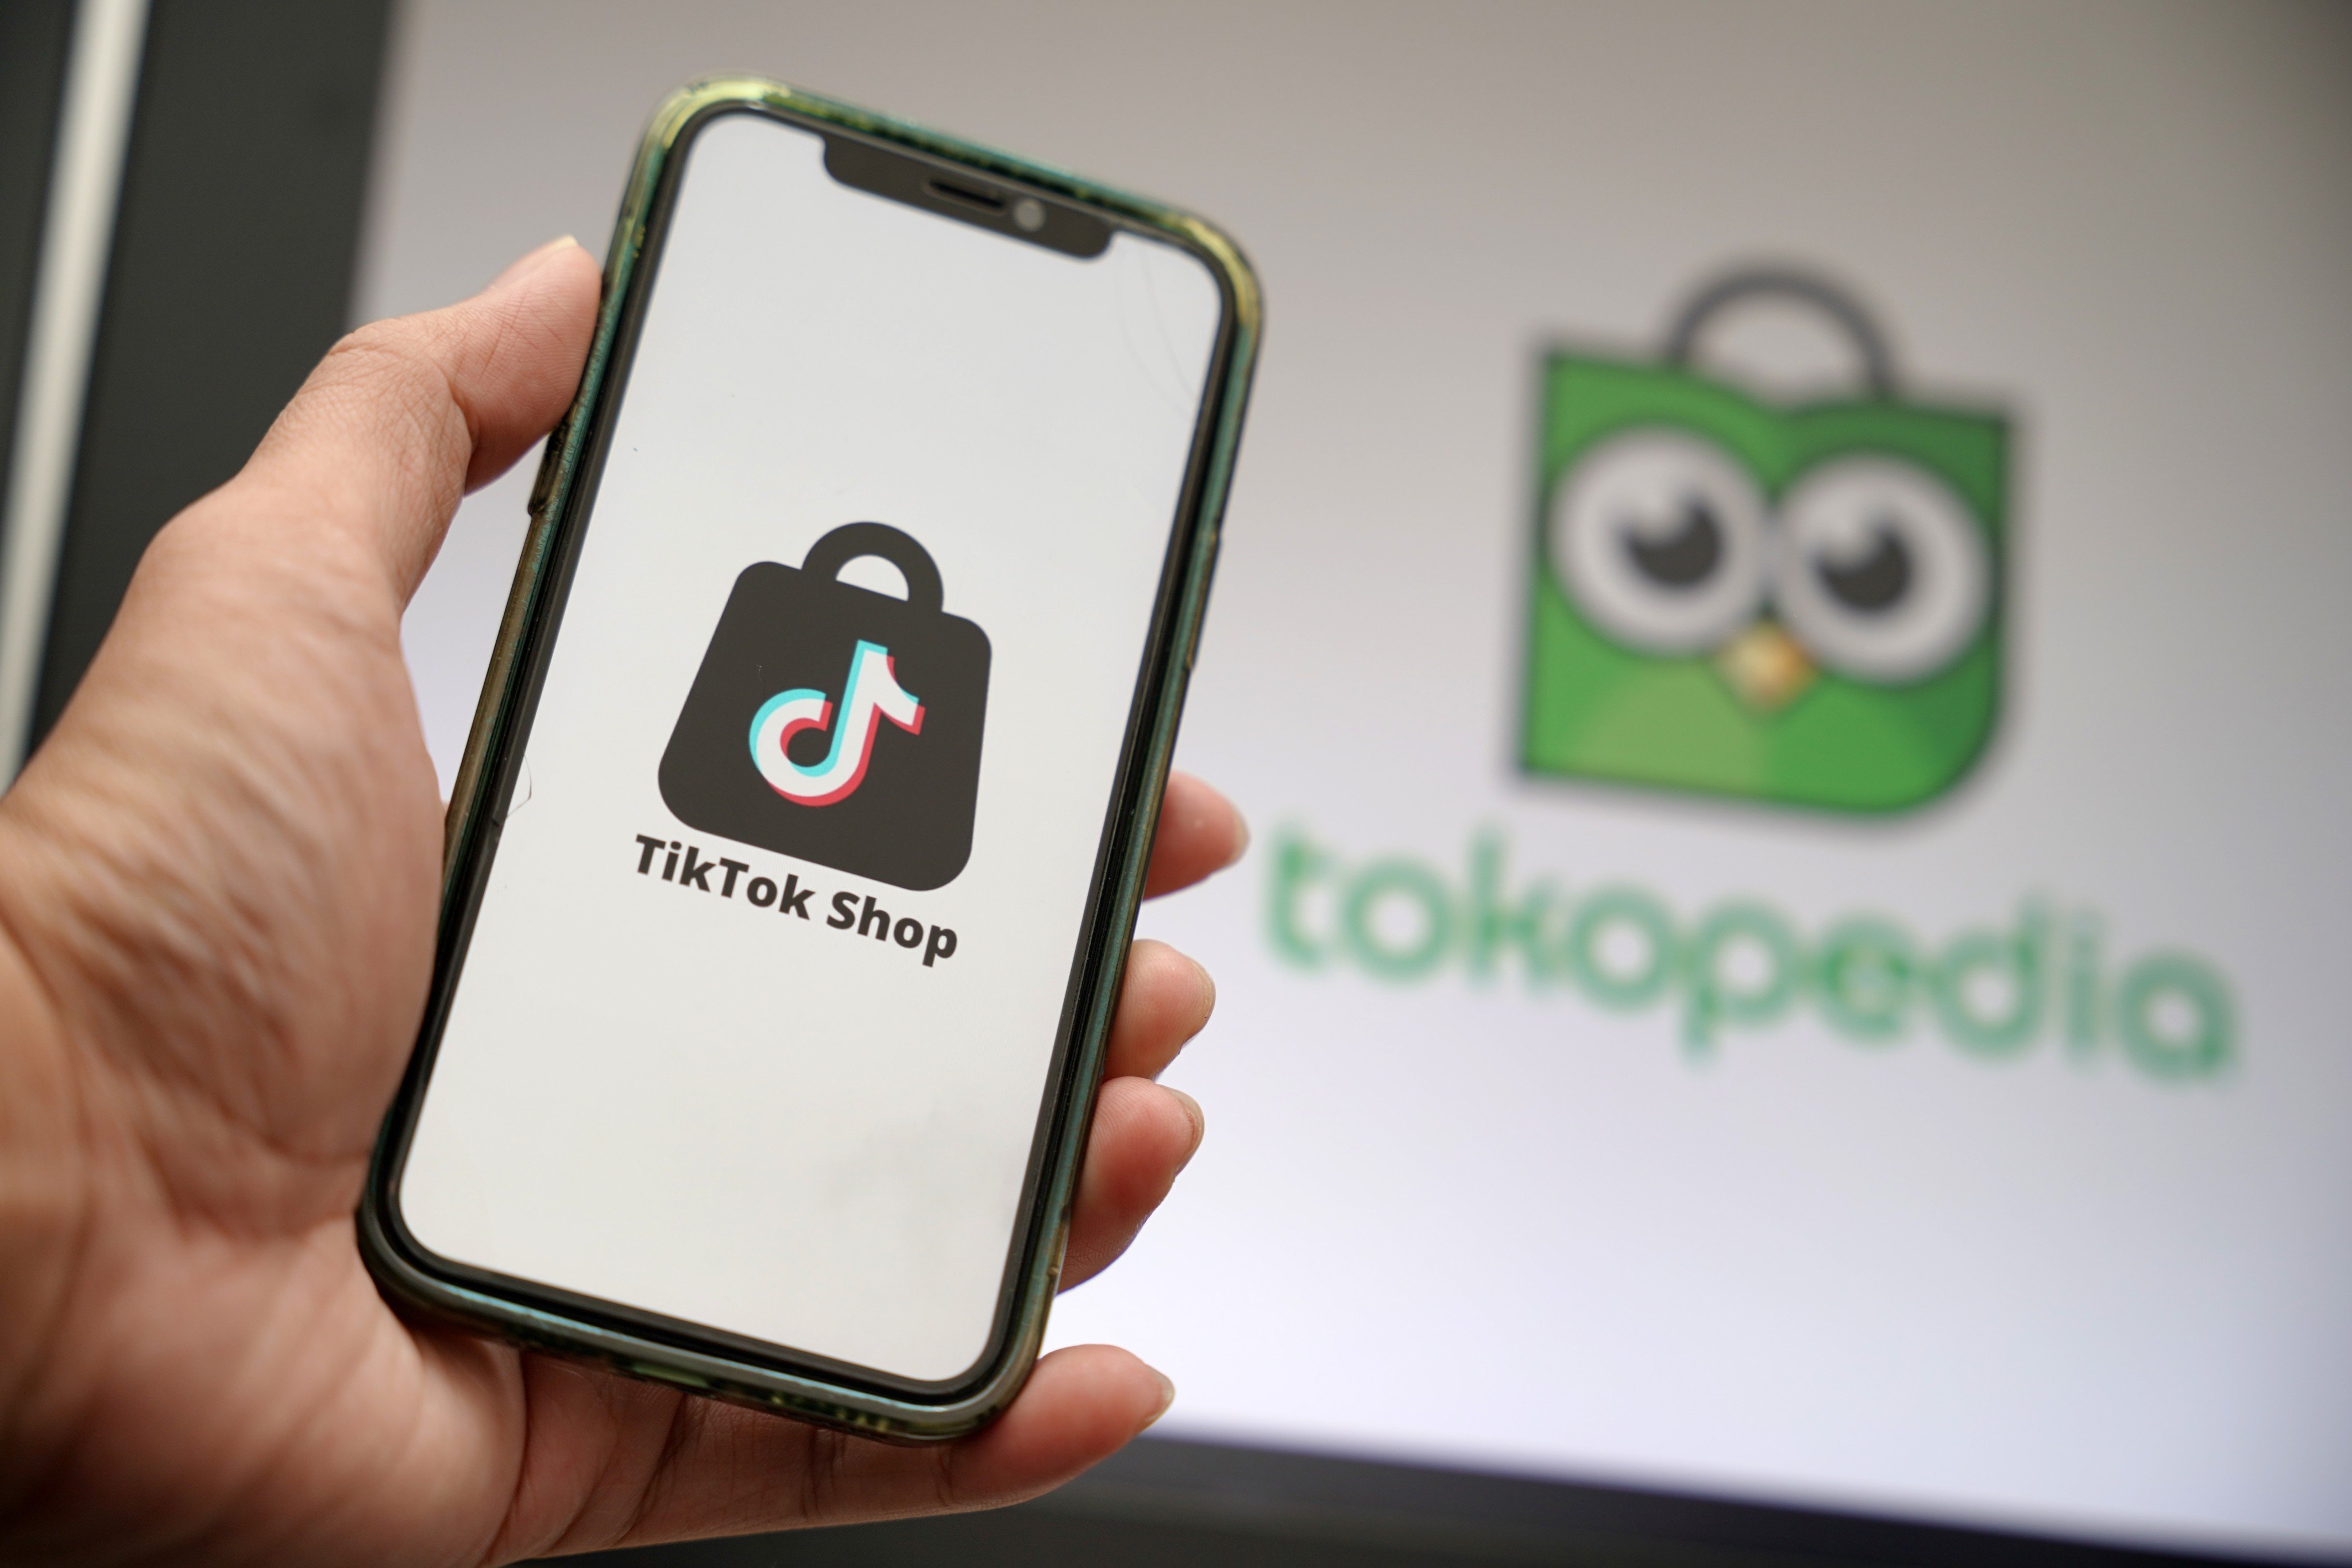 ByteDance expanded its e-commerce operations in Indonesia after striking a US$1.5 billion deal that merged TikTok Shop with GoTo Group’s Tokopedia. Photo: Shutterstock